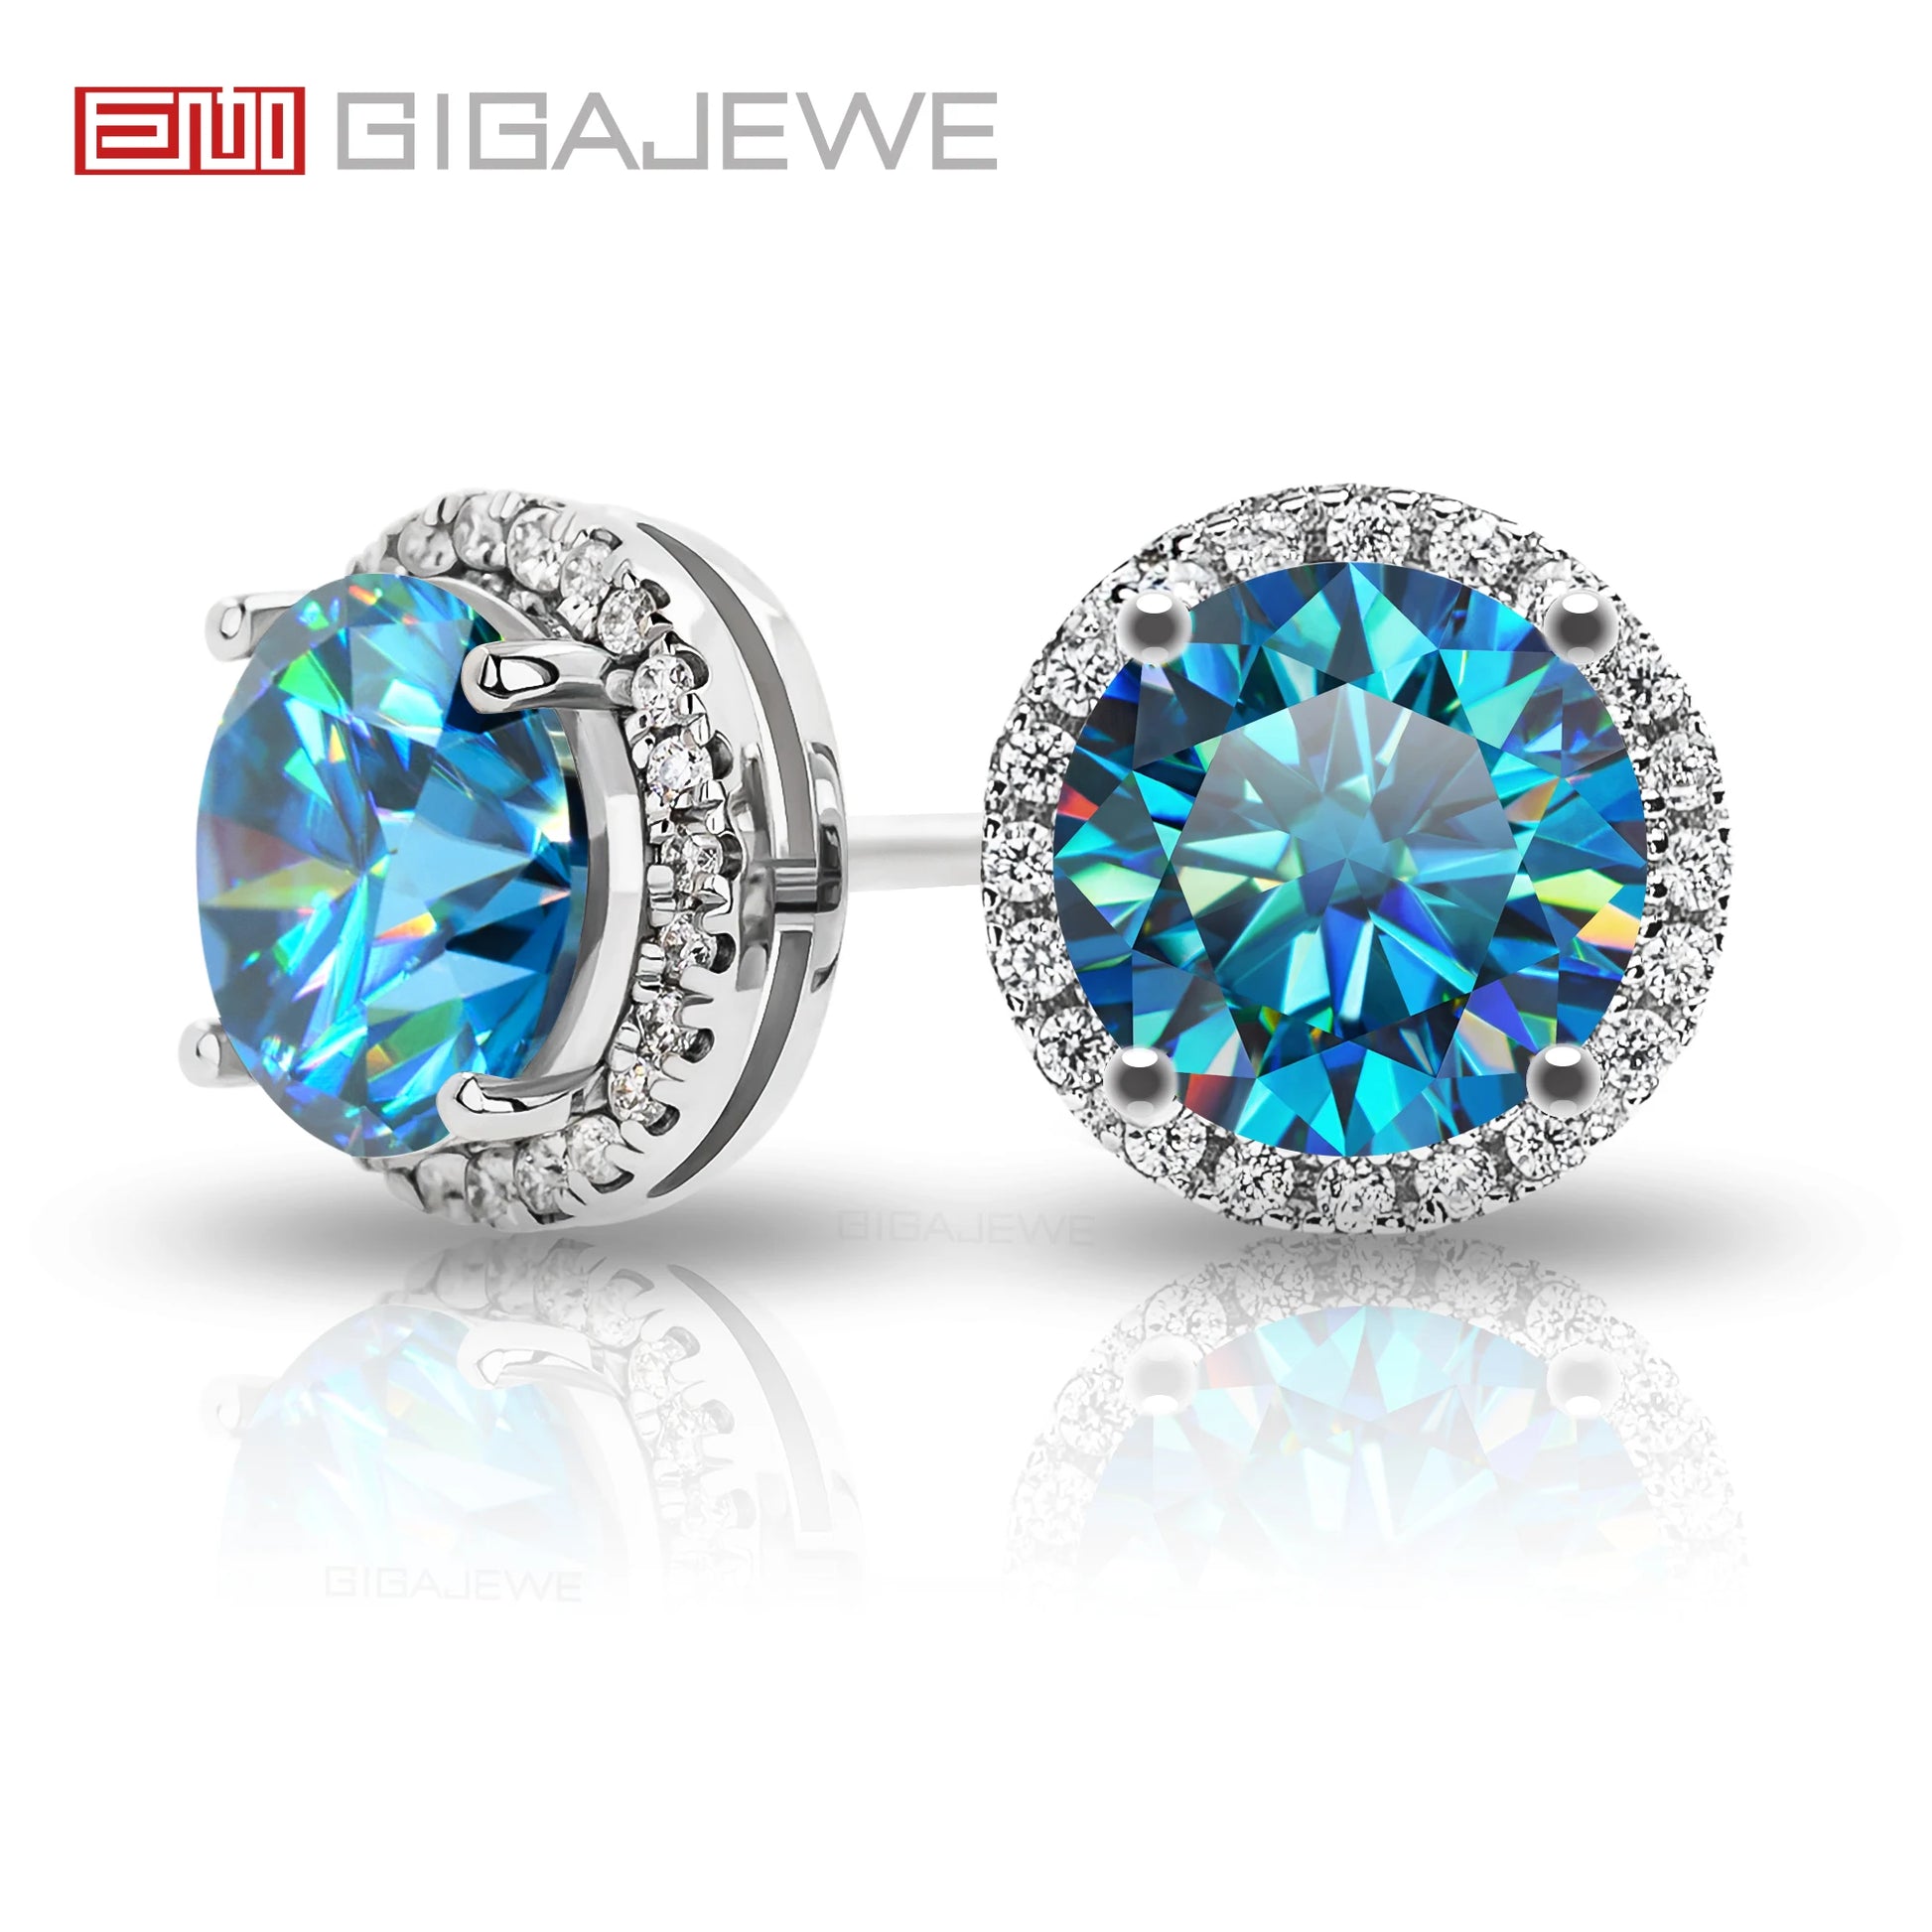 GIGAJEWE Moissanite Hot Selling Items Earrings D Color VVS1 S925 Silver 18K Gold Plated Jewelry Woman Gift